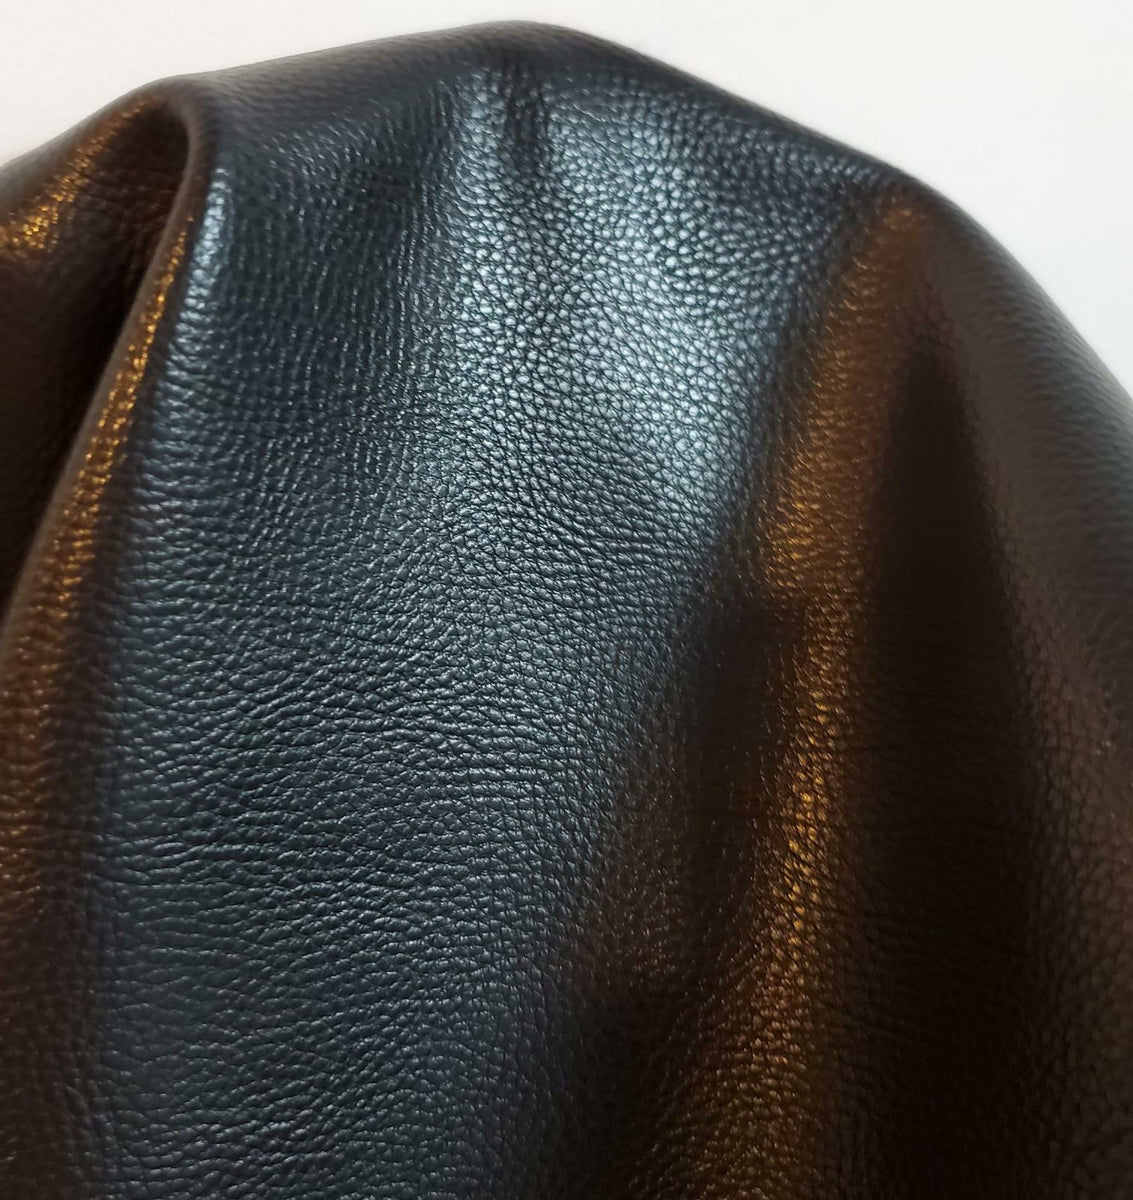 Black Faux Leather Smooth Pleather Sold by the Yard 36 Inches X 54 Inches  Wide Synthetic for One Yard. 1 5 Yards 